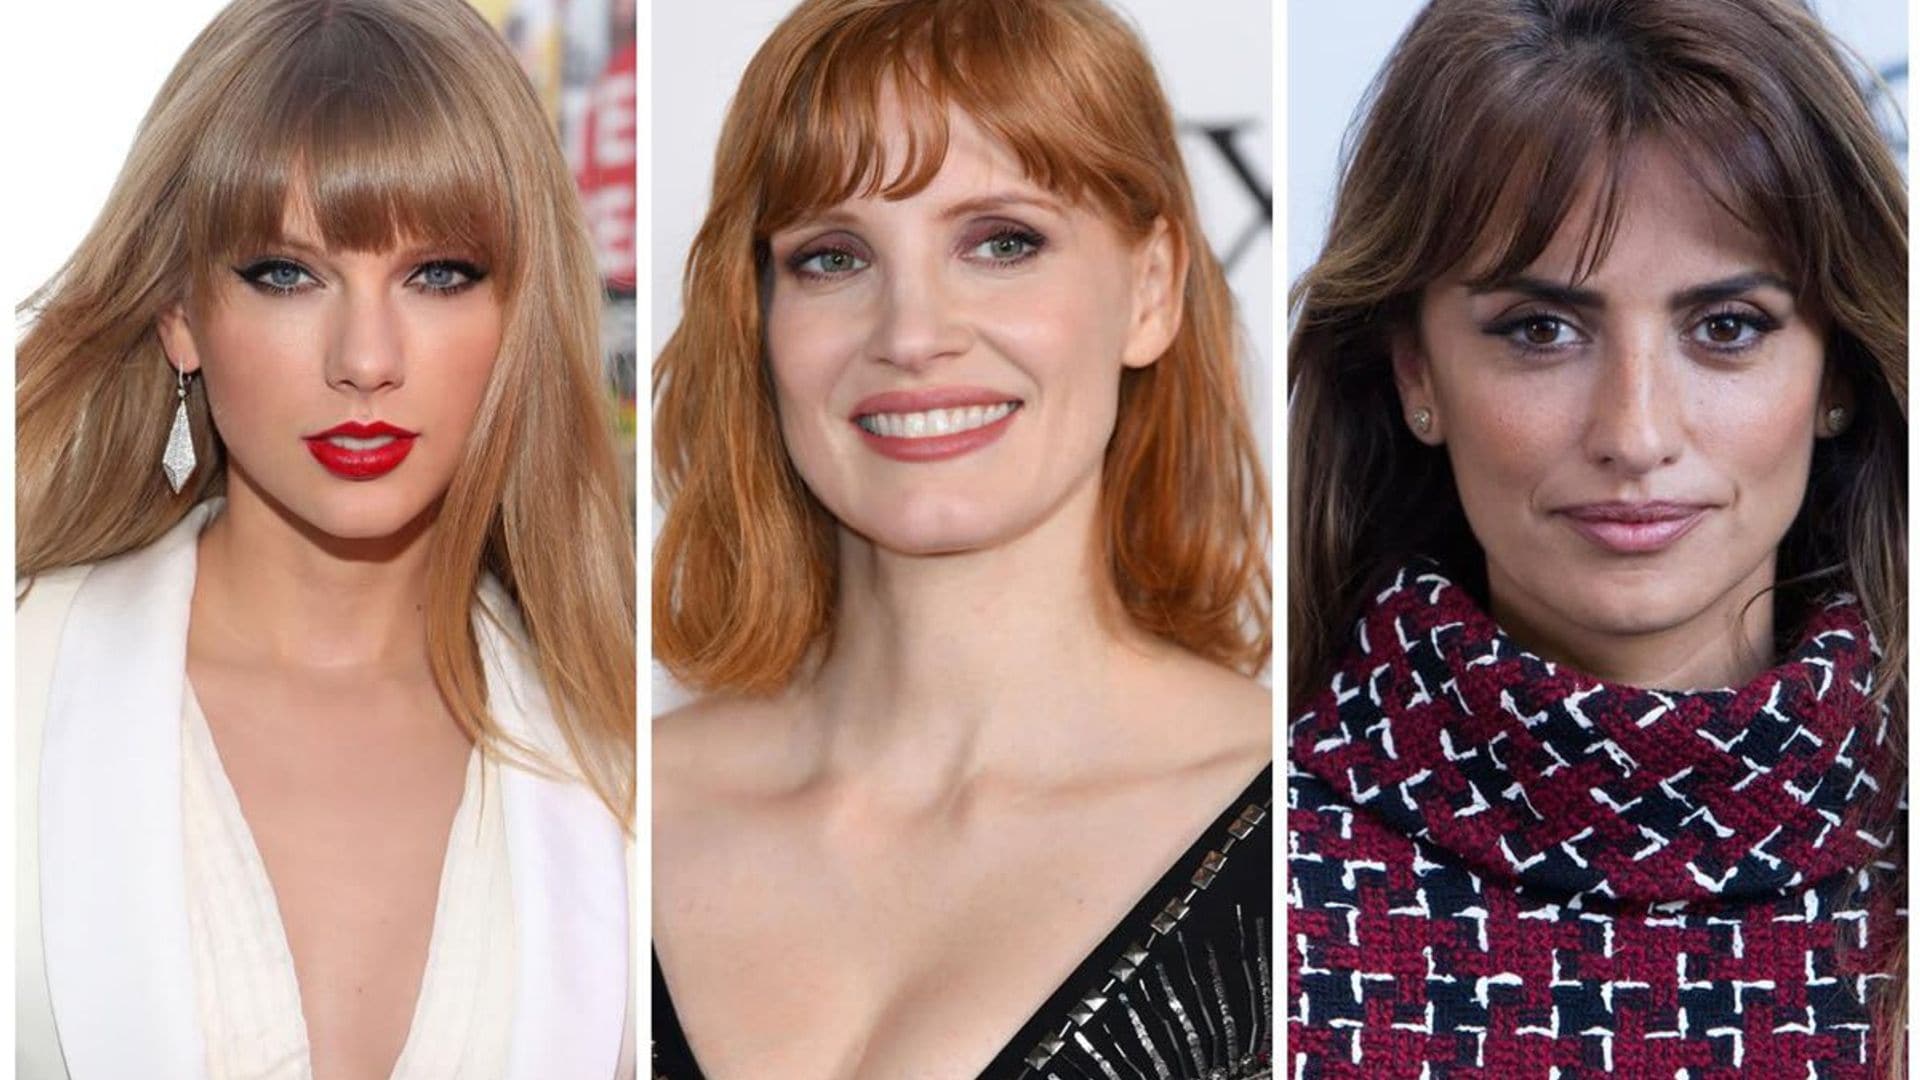 Celebrity hairstyles: How to choose the right bangs for your face shape